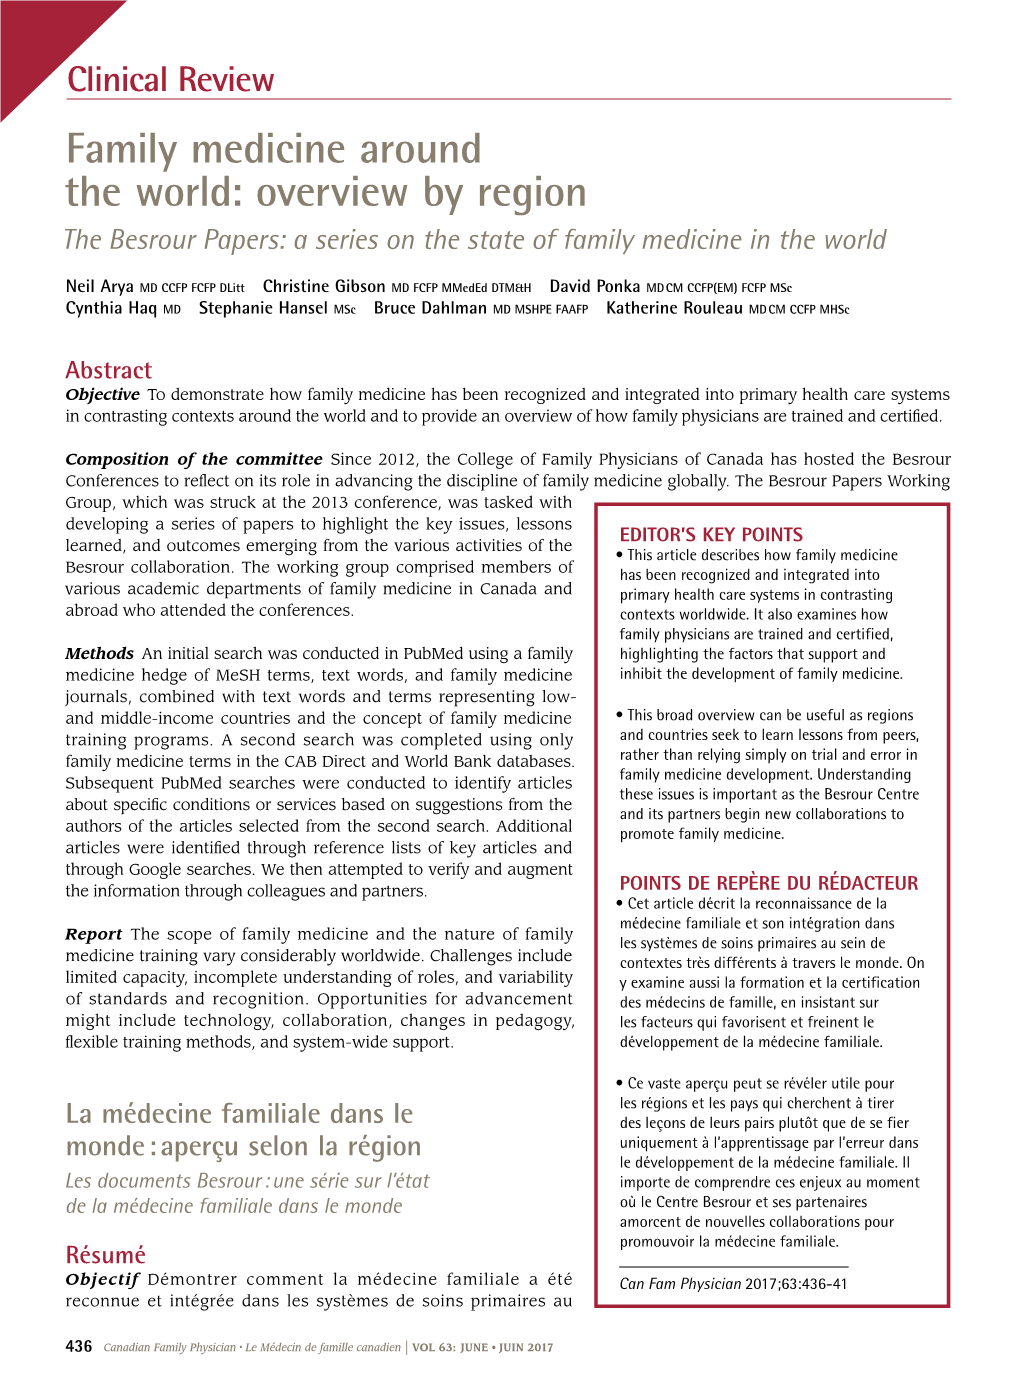 Family Medicine Around the World: Overview by Region the Besrour Papers: a Series on the State of Family Medicine in the World